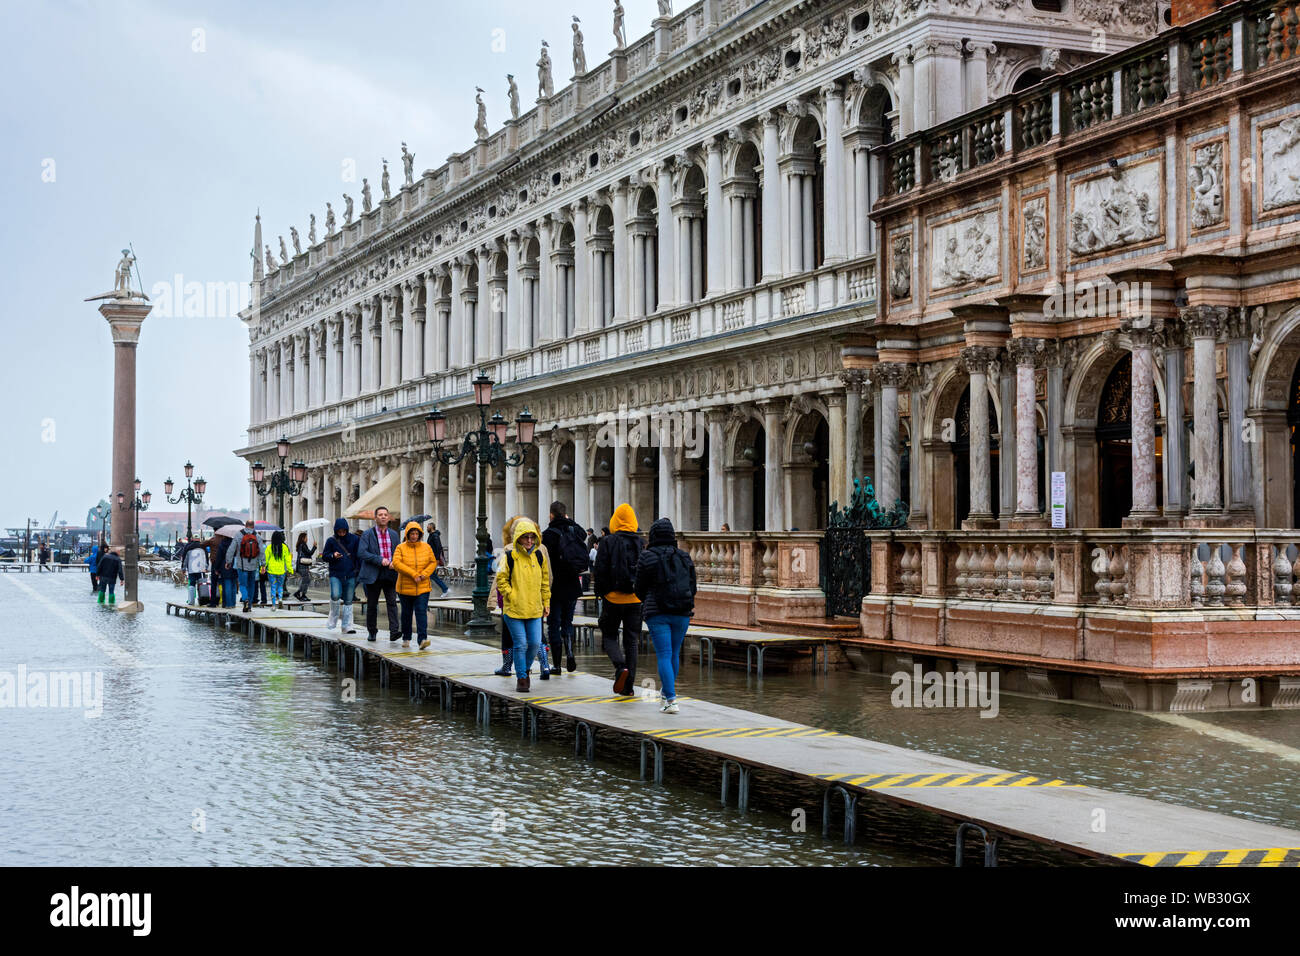 People walking on elevated platforms during an Acqua alta (high water) event, at the Biblioteca building, Piazzetta di San Marco, Venice, Italy Stock Photo